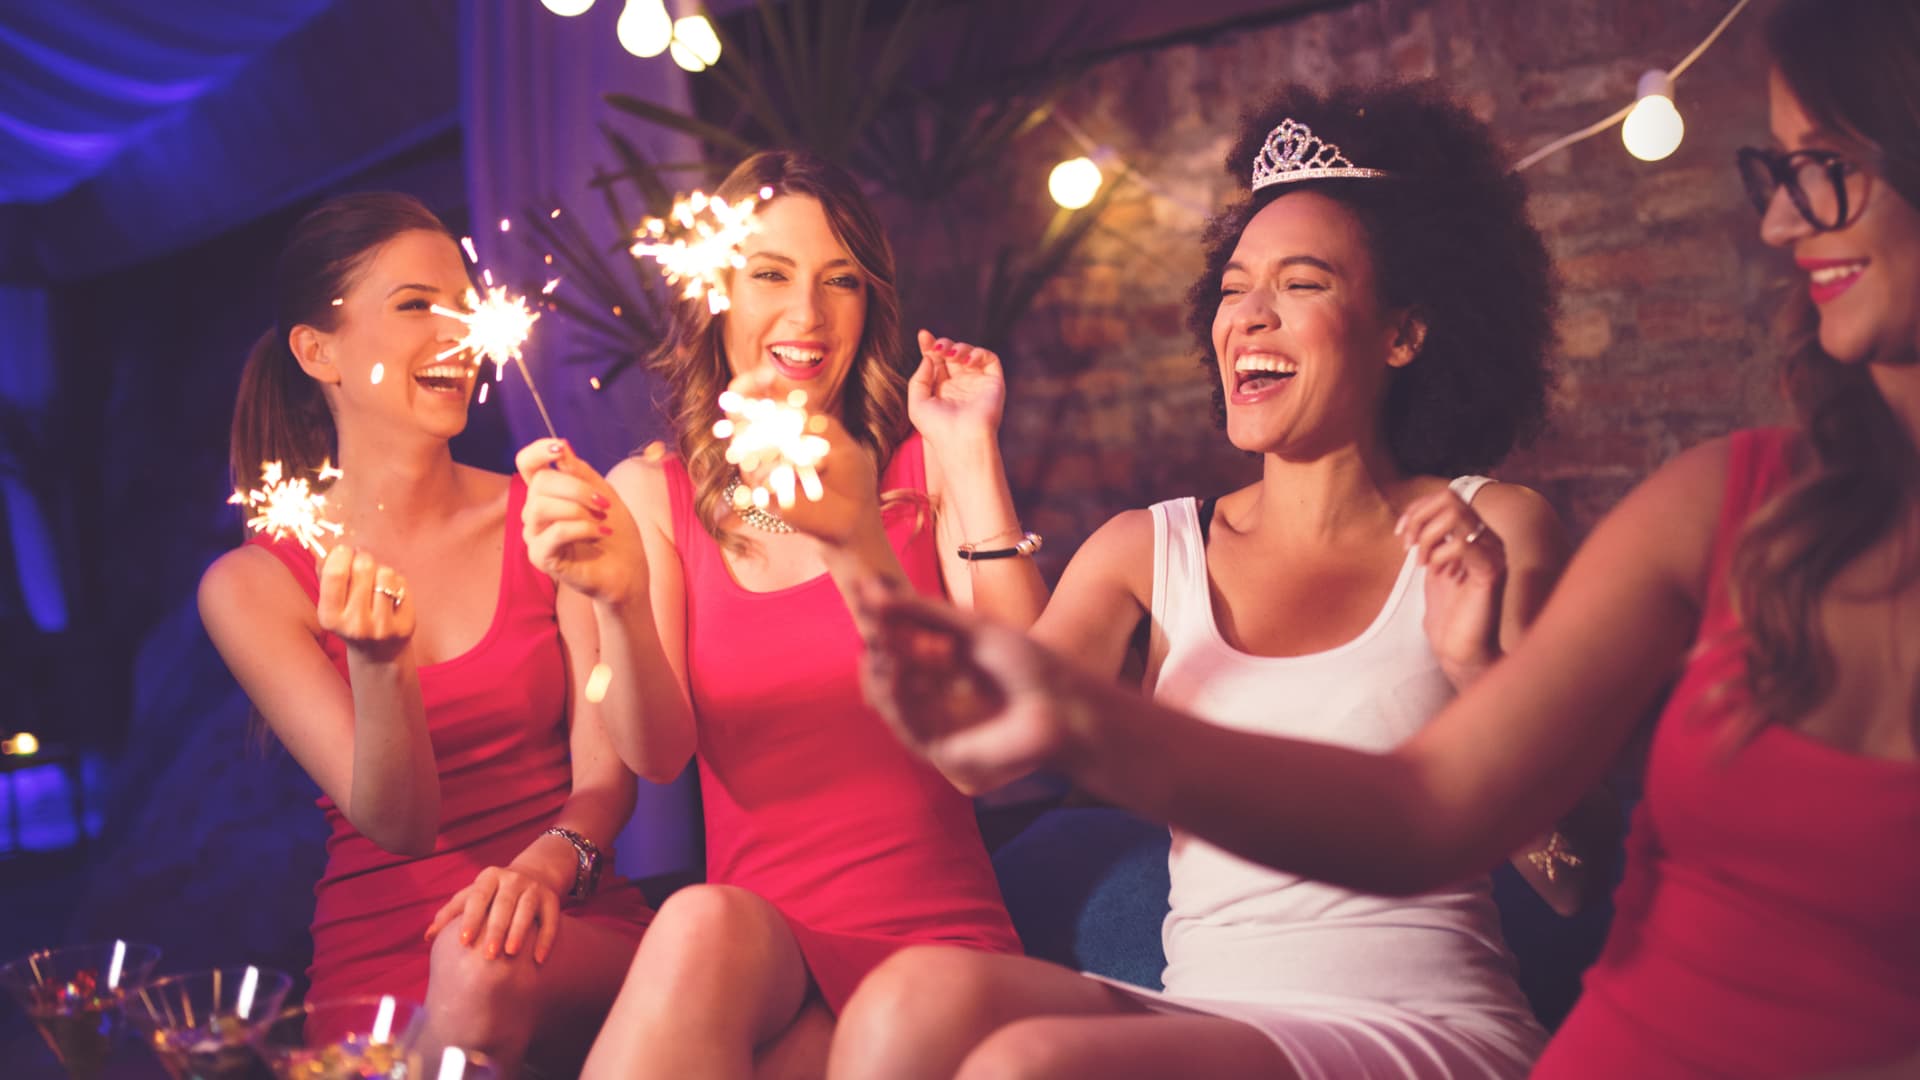 How much do women spend on bachelorette parties